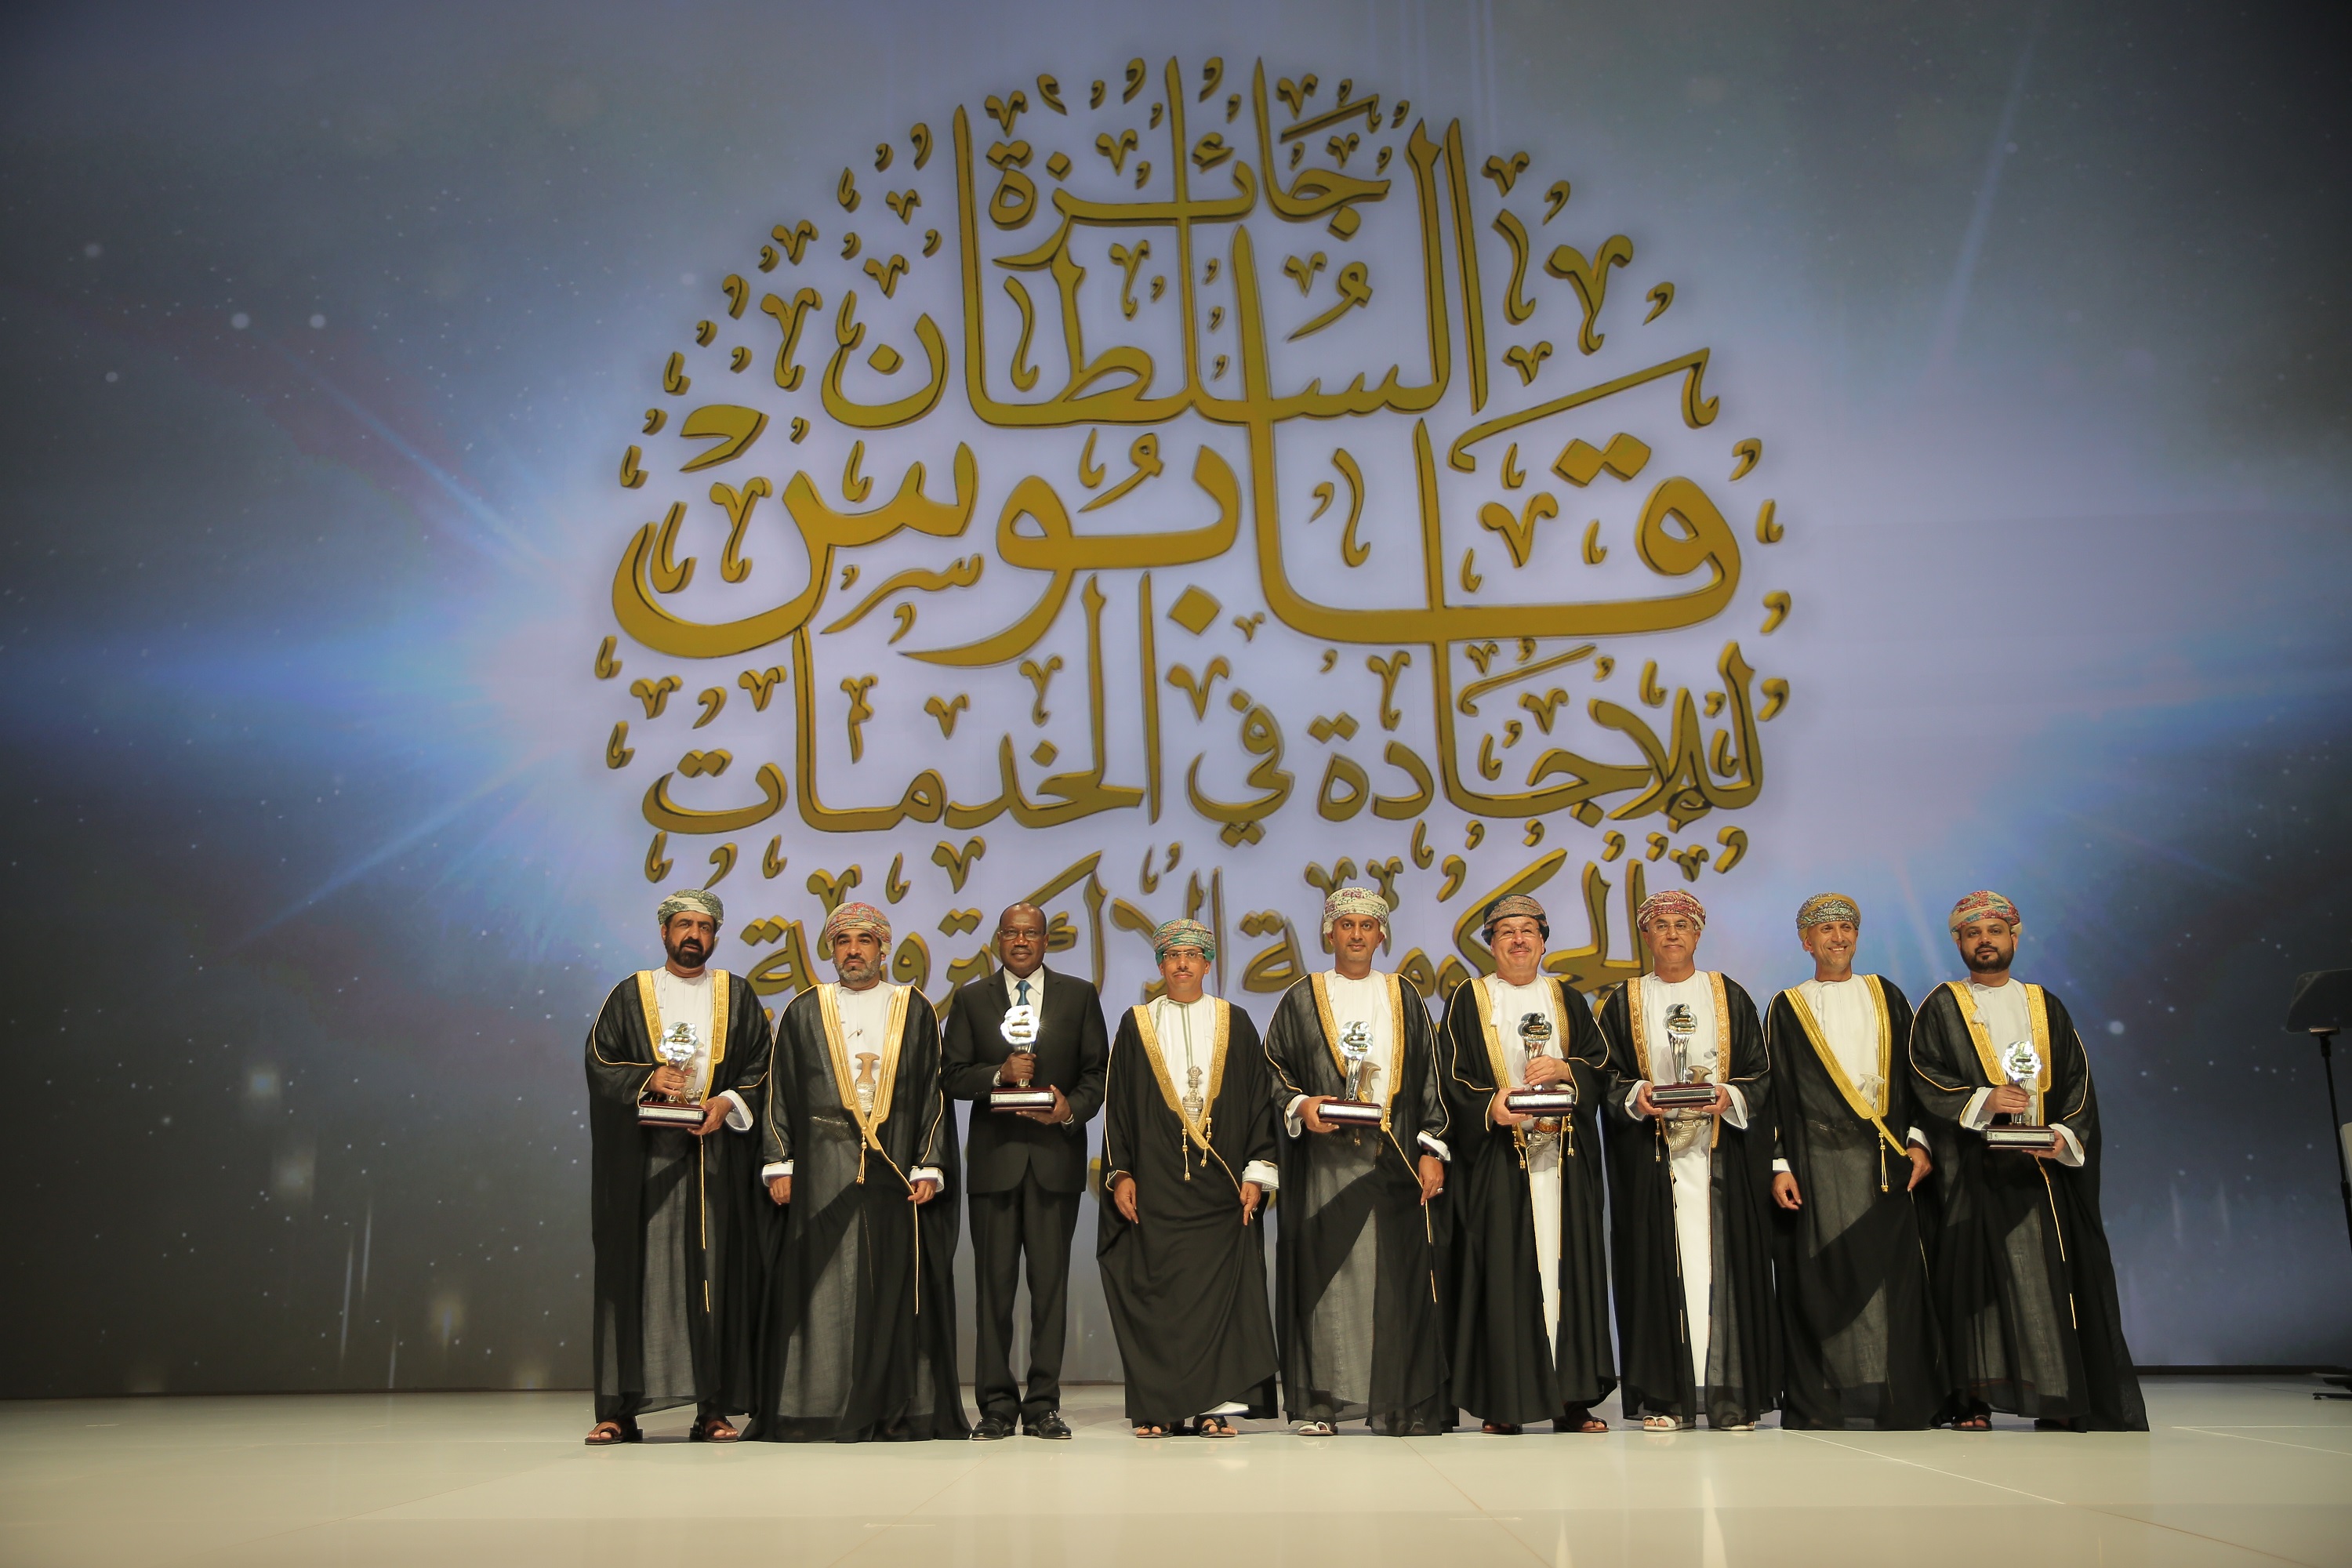 Winners of Sultan Qaboos Award for excellence declared in Oman